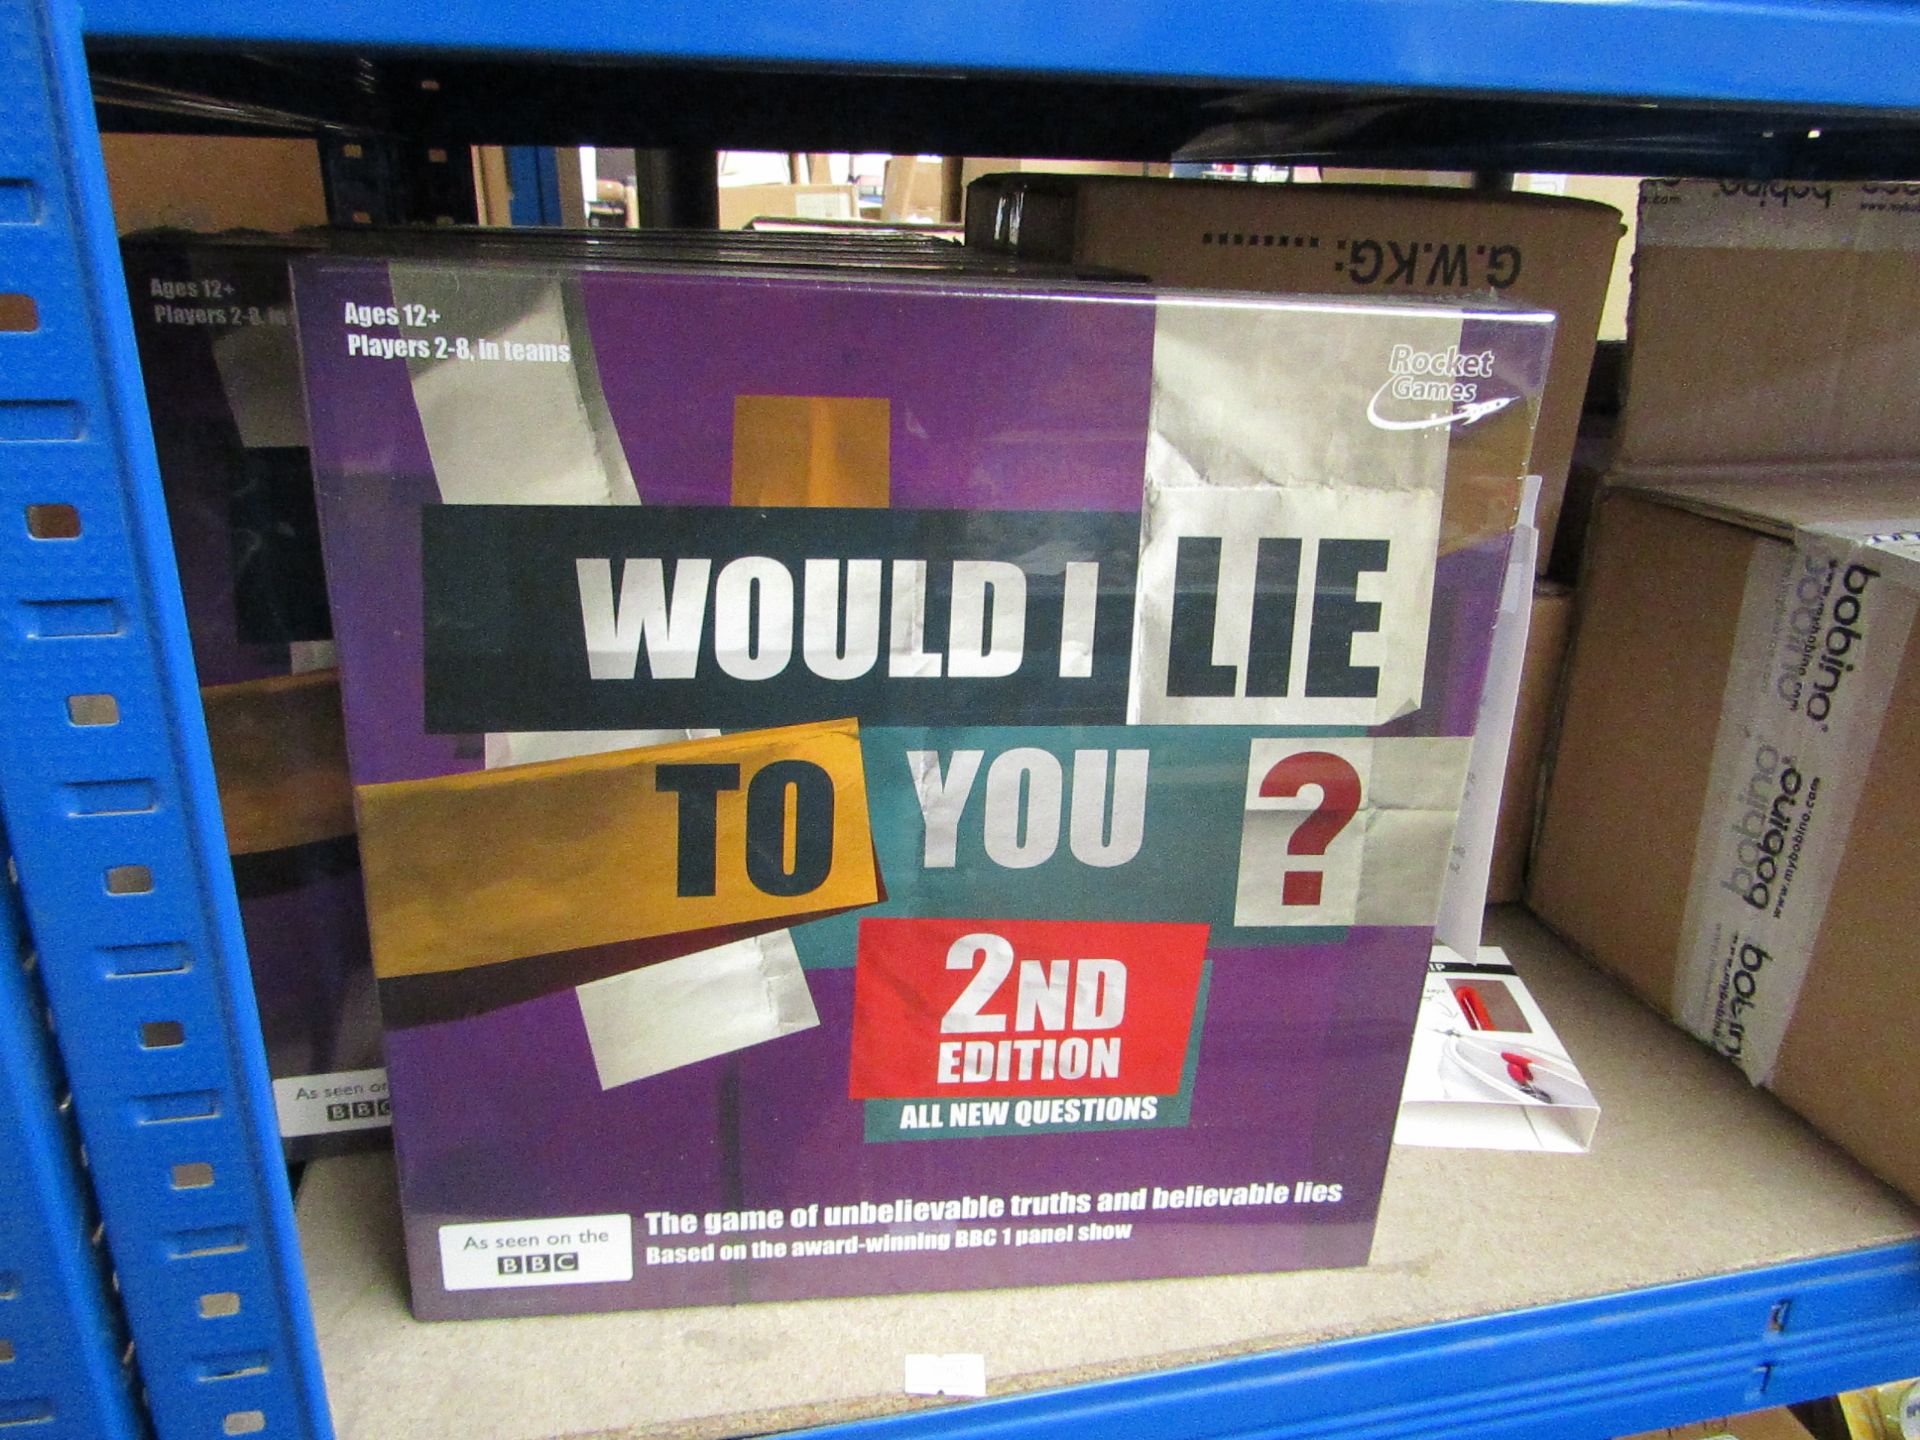 Rocket Games - Would I Lie To You 2nd Edition Activity Game - New & Packaged.